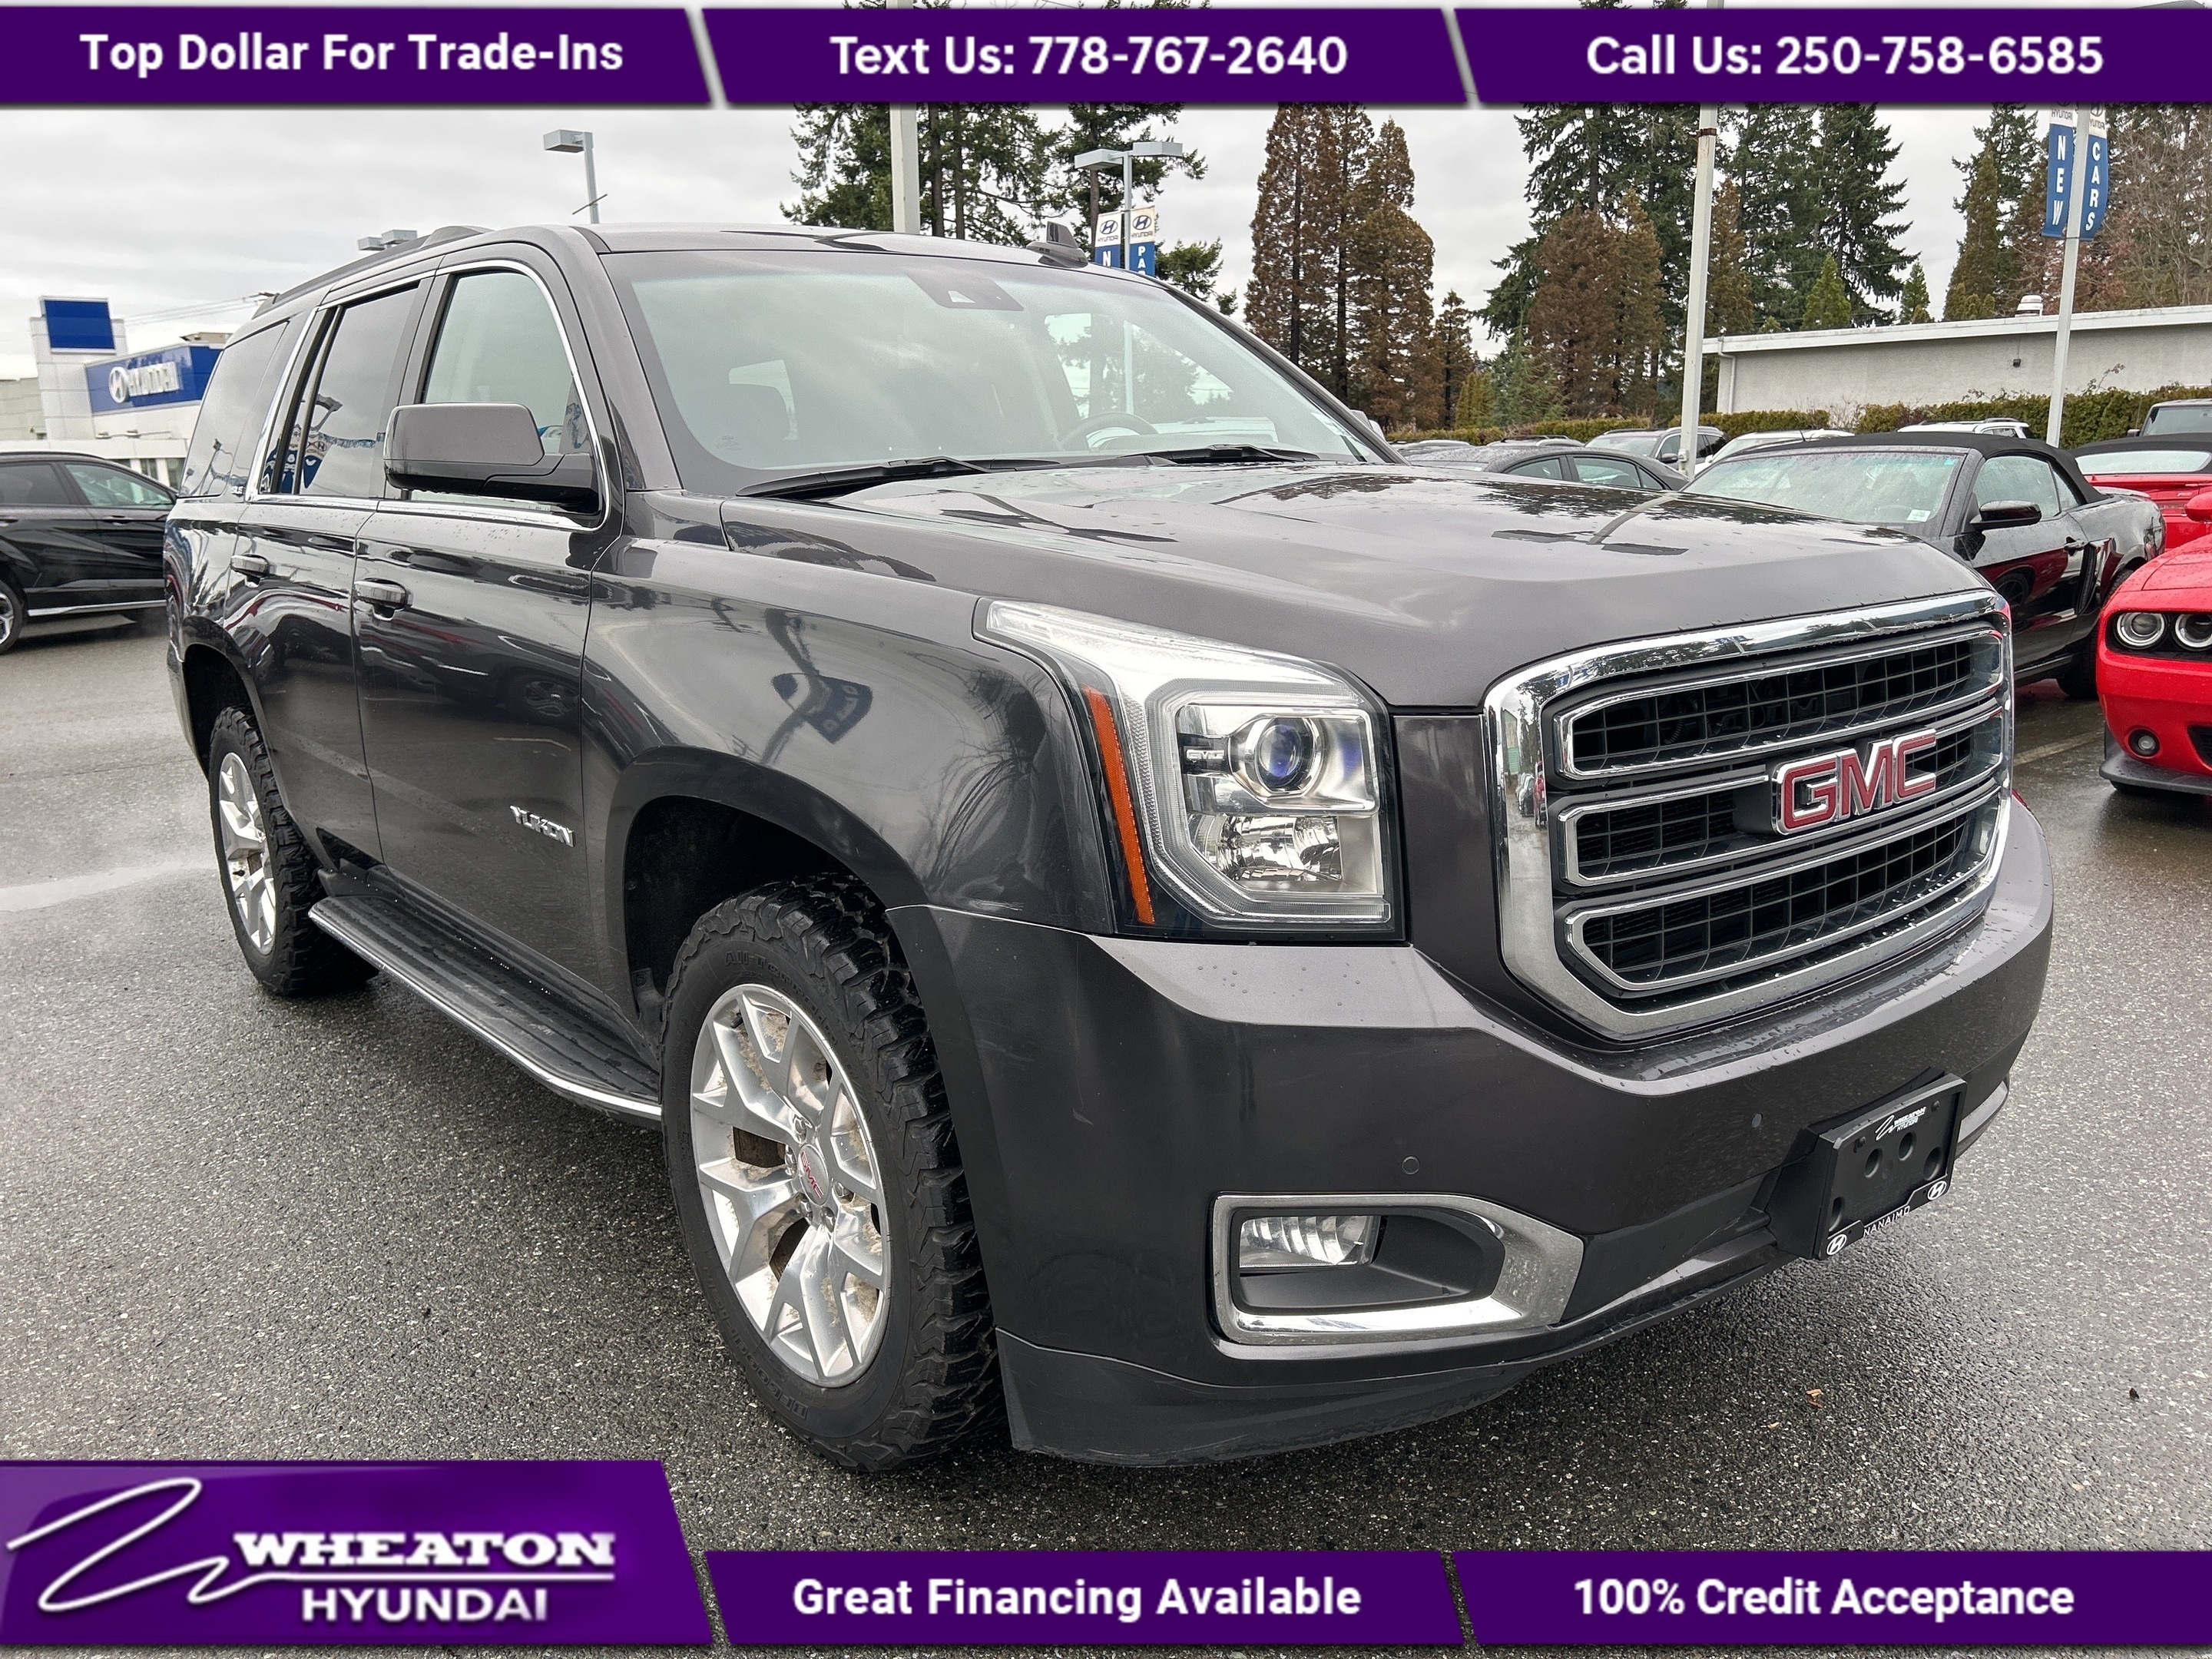 2016 GMC Yukon SLE, BC Car, Trade in, Touch Screen, Back Up Camer